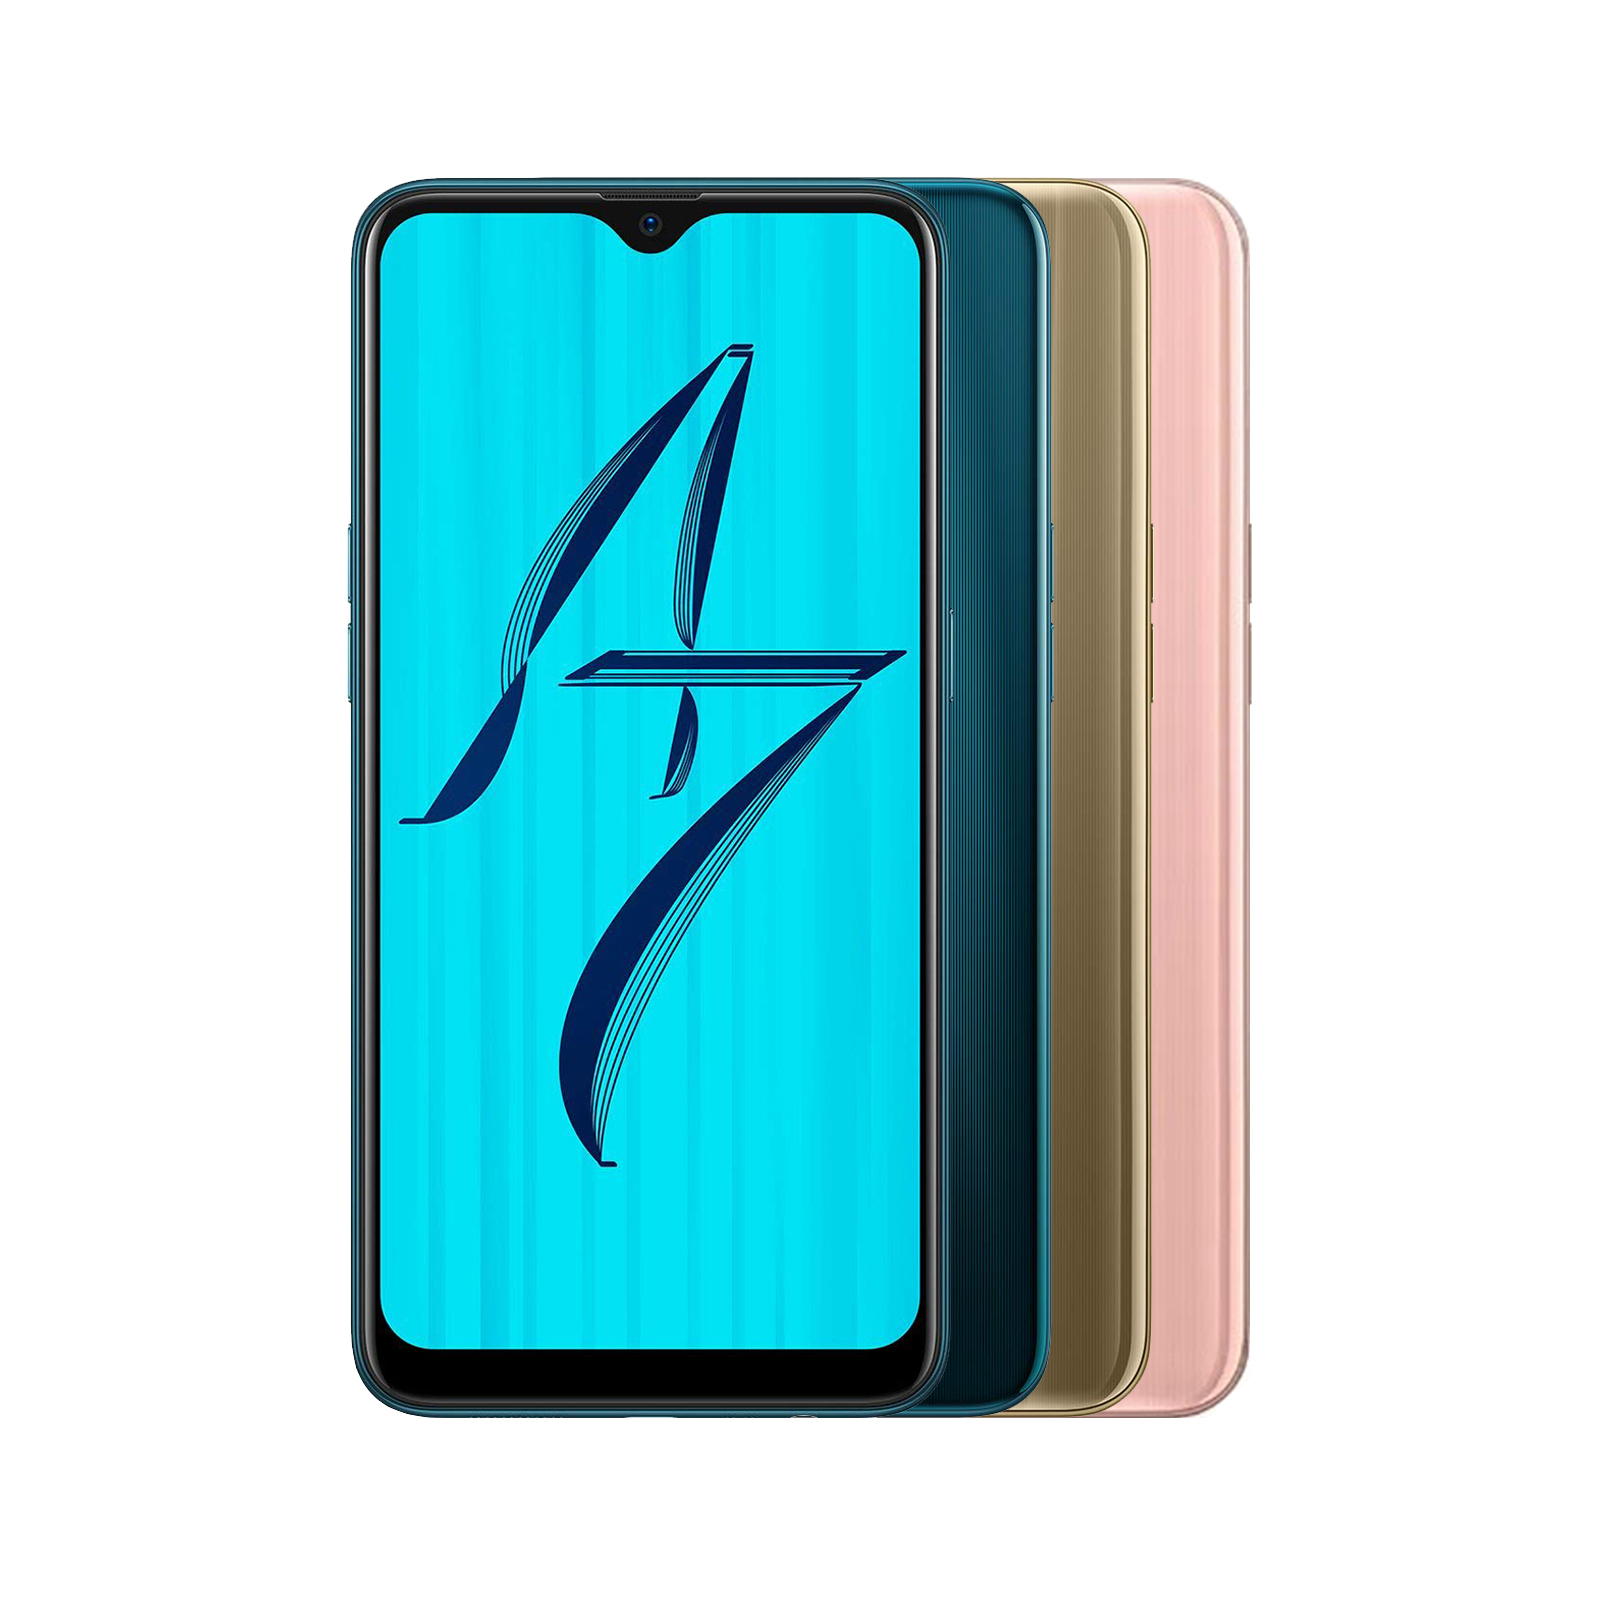 Oppo AX7 - As New